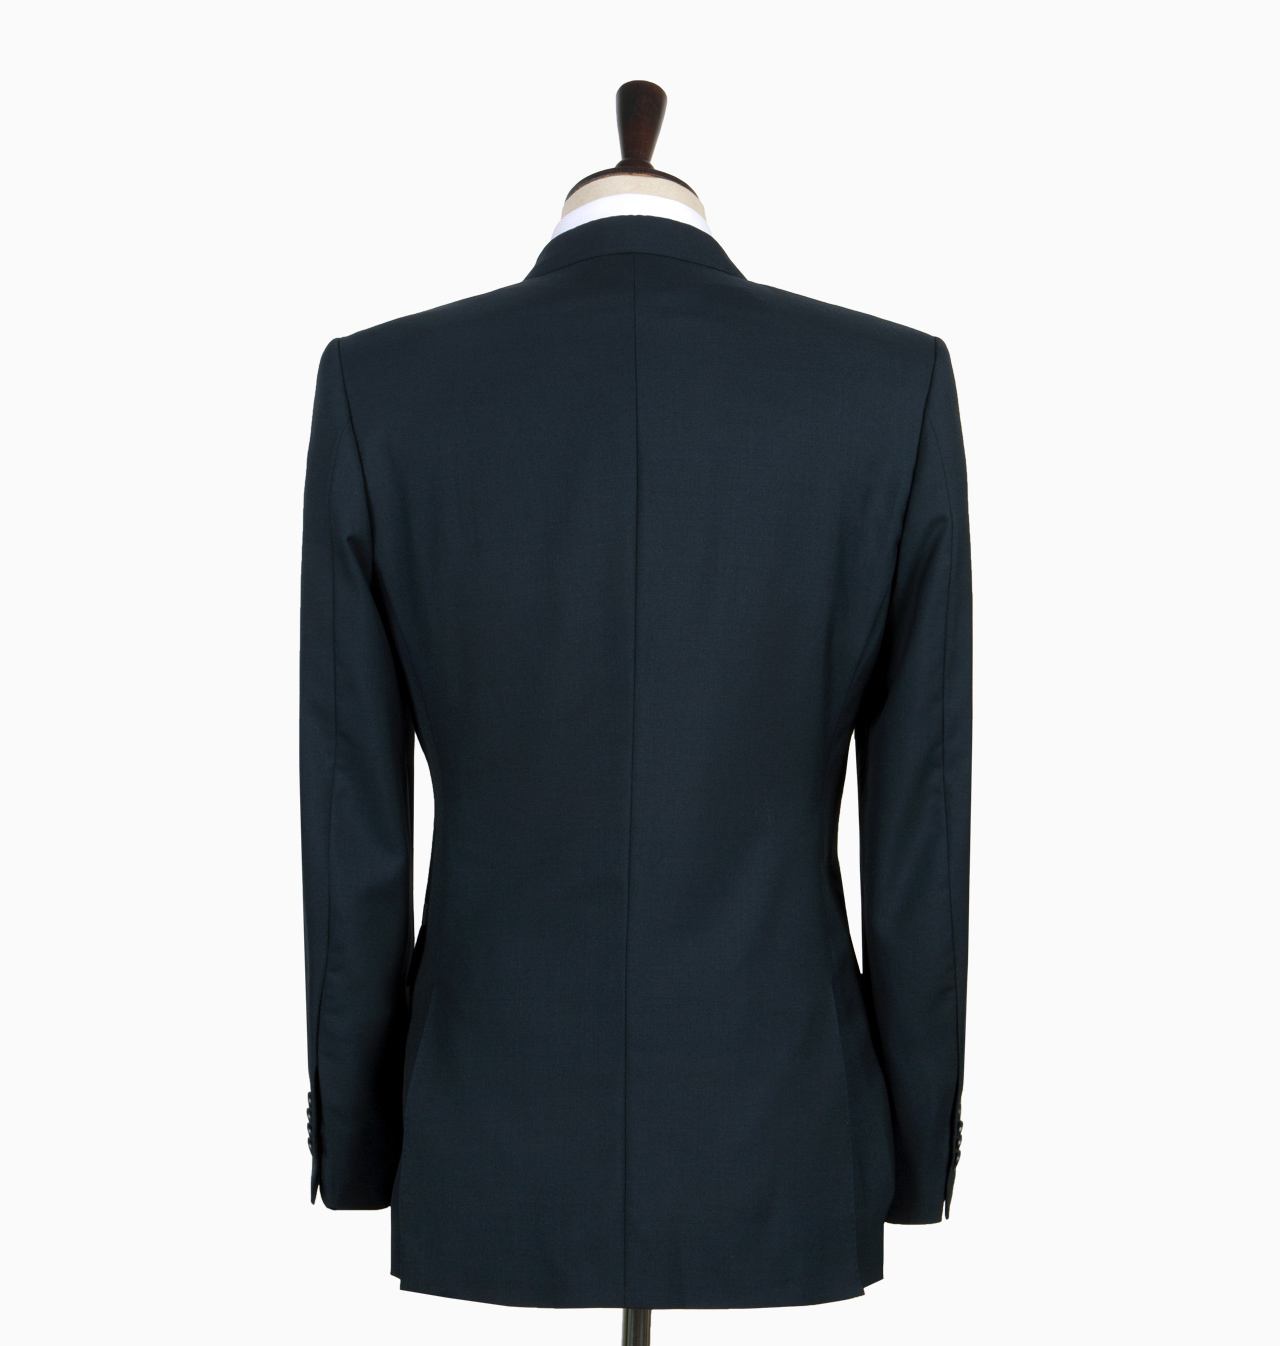 Navy Twill / S1500 - Suiting